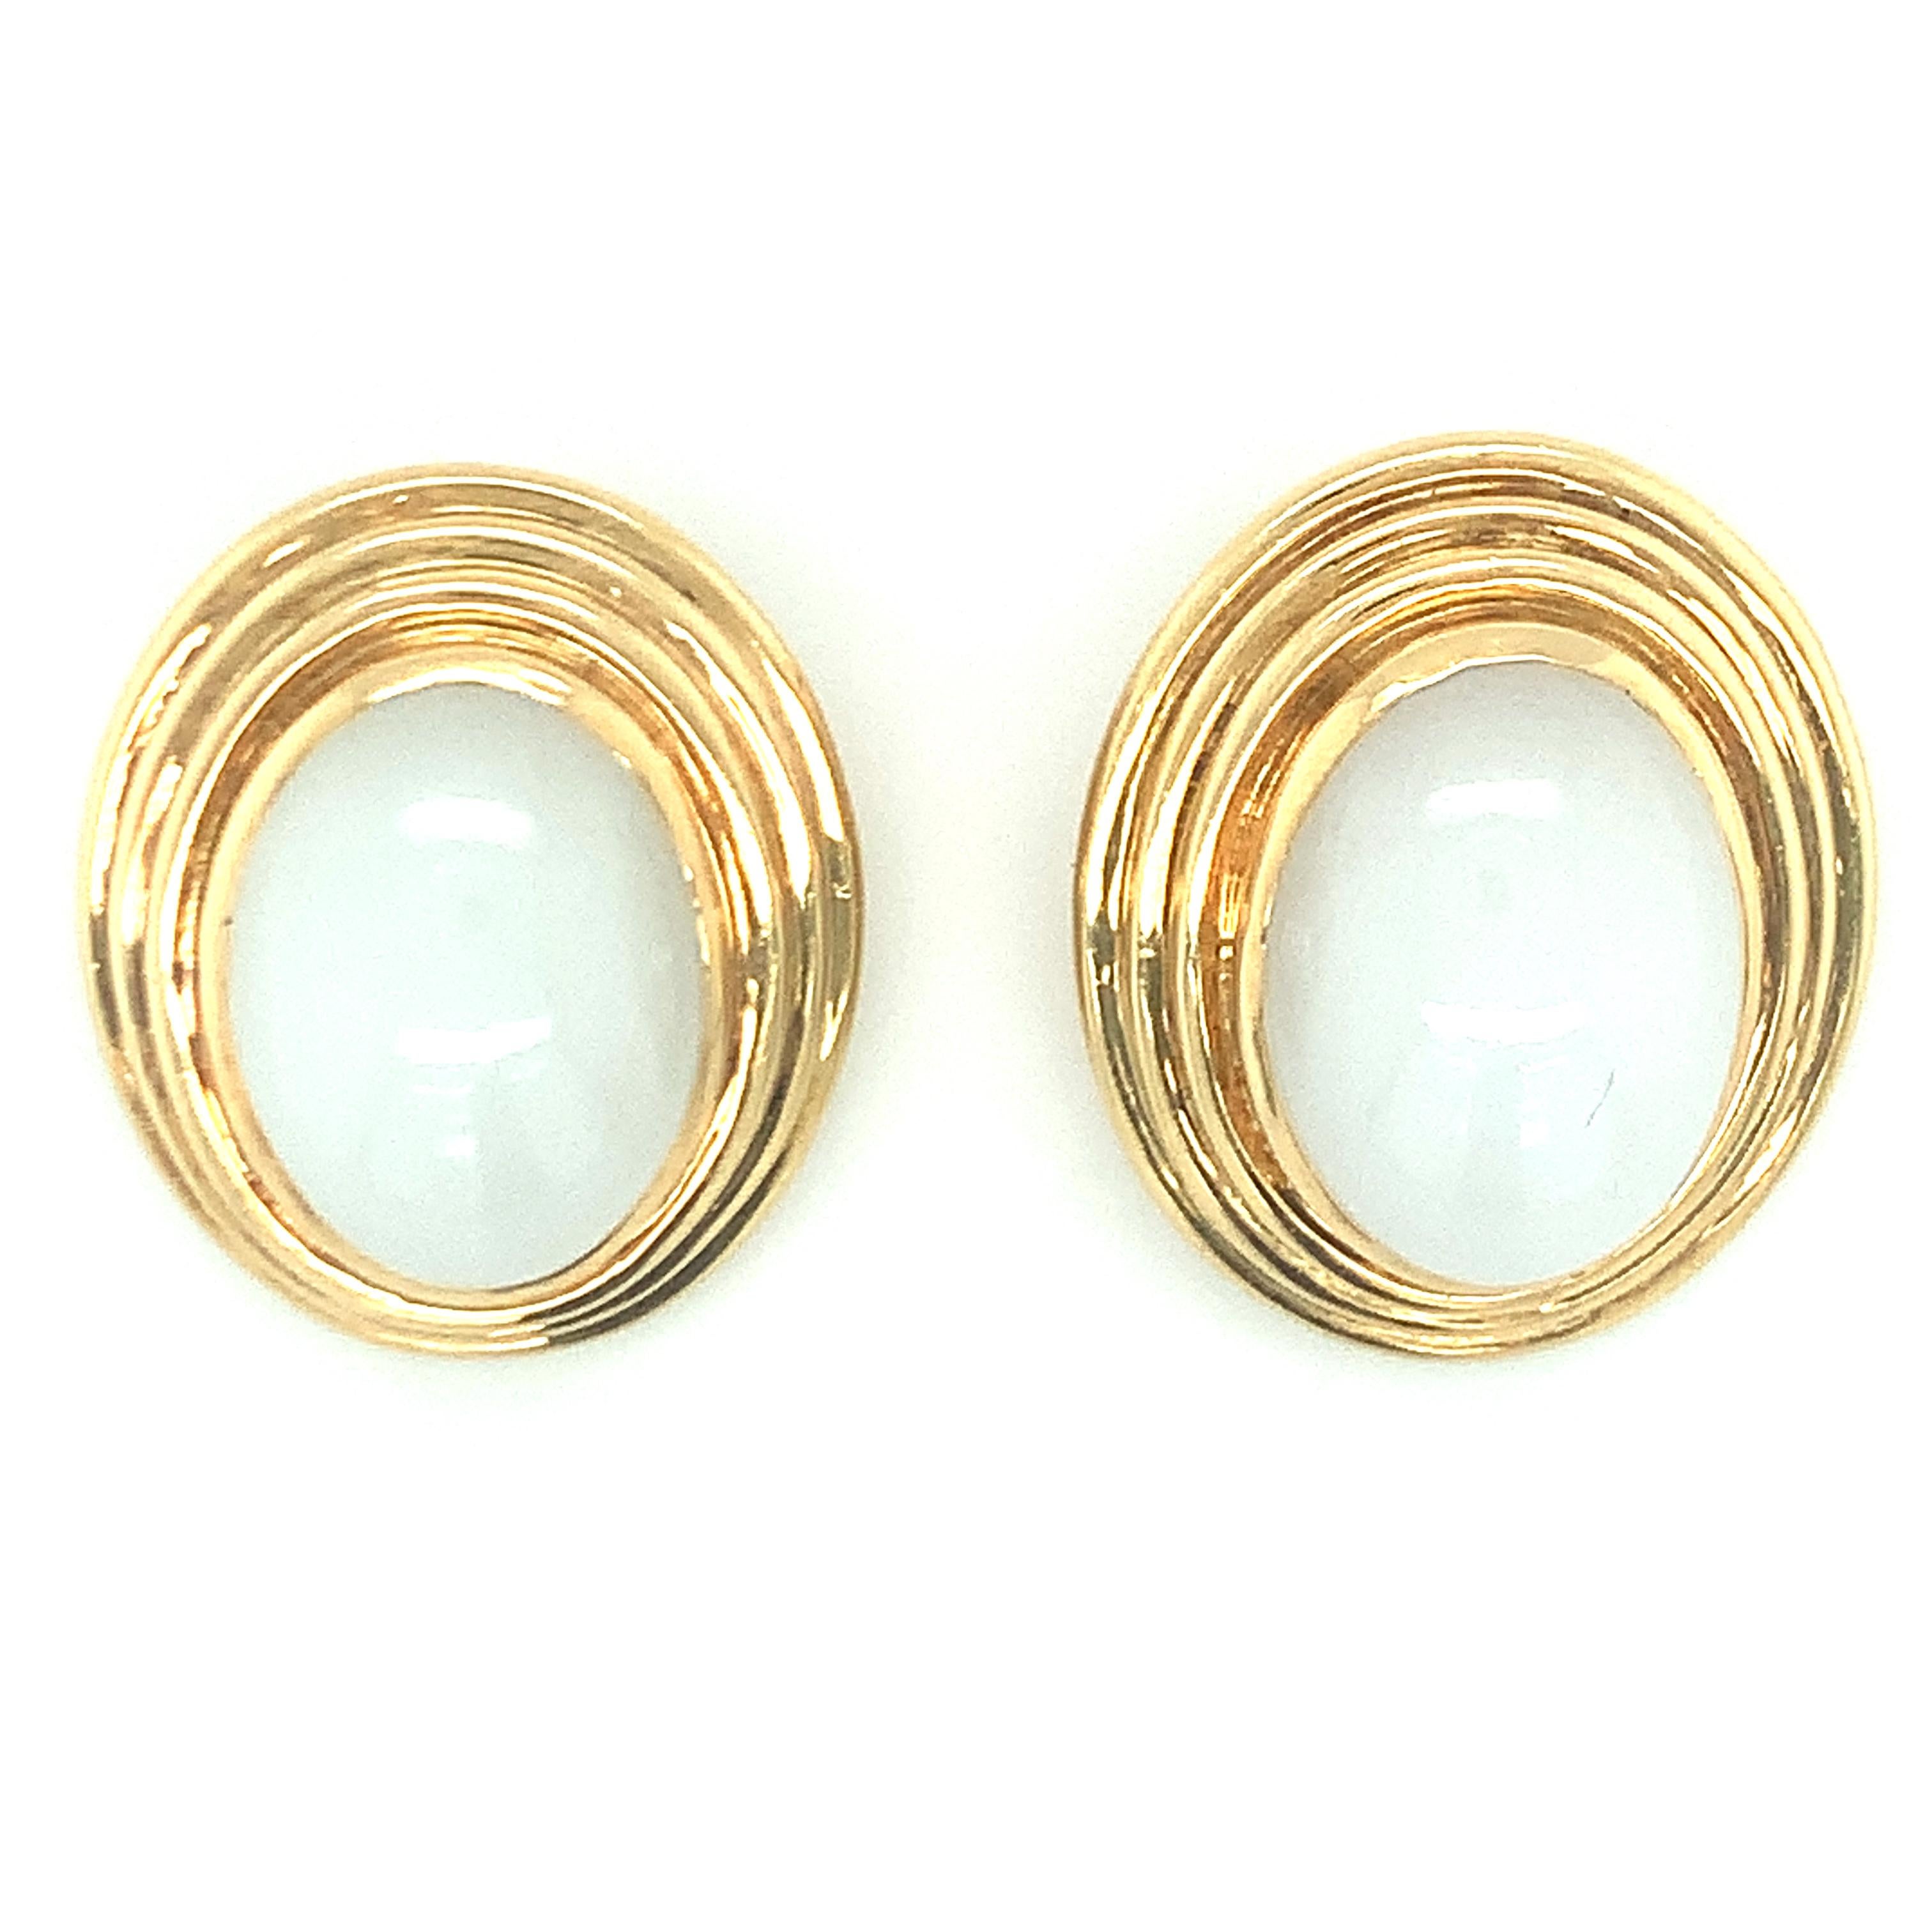 White Jadeite Jade 18K Gold Earclips by Gumps In Good Condition For Sale In Beverly Hills, CA